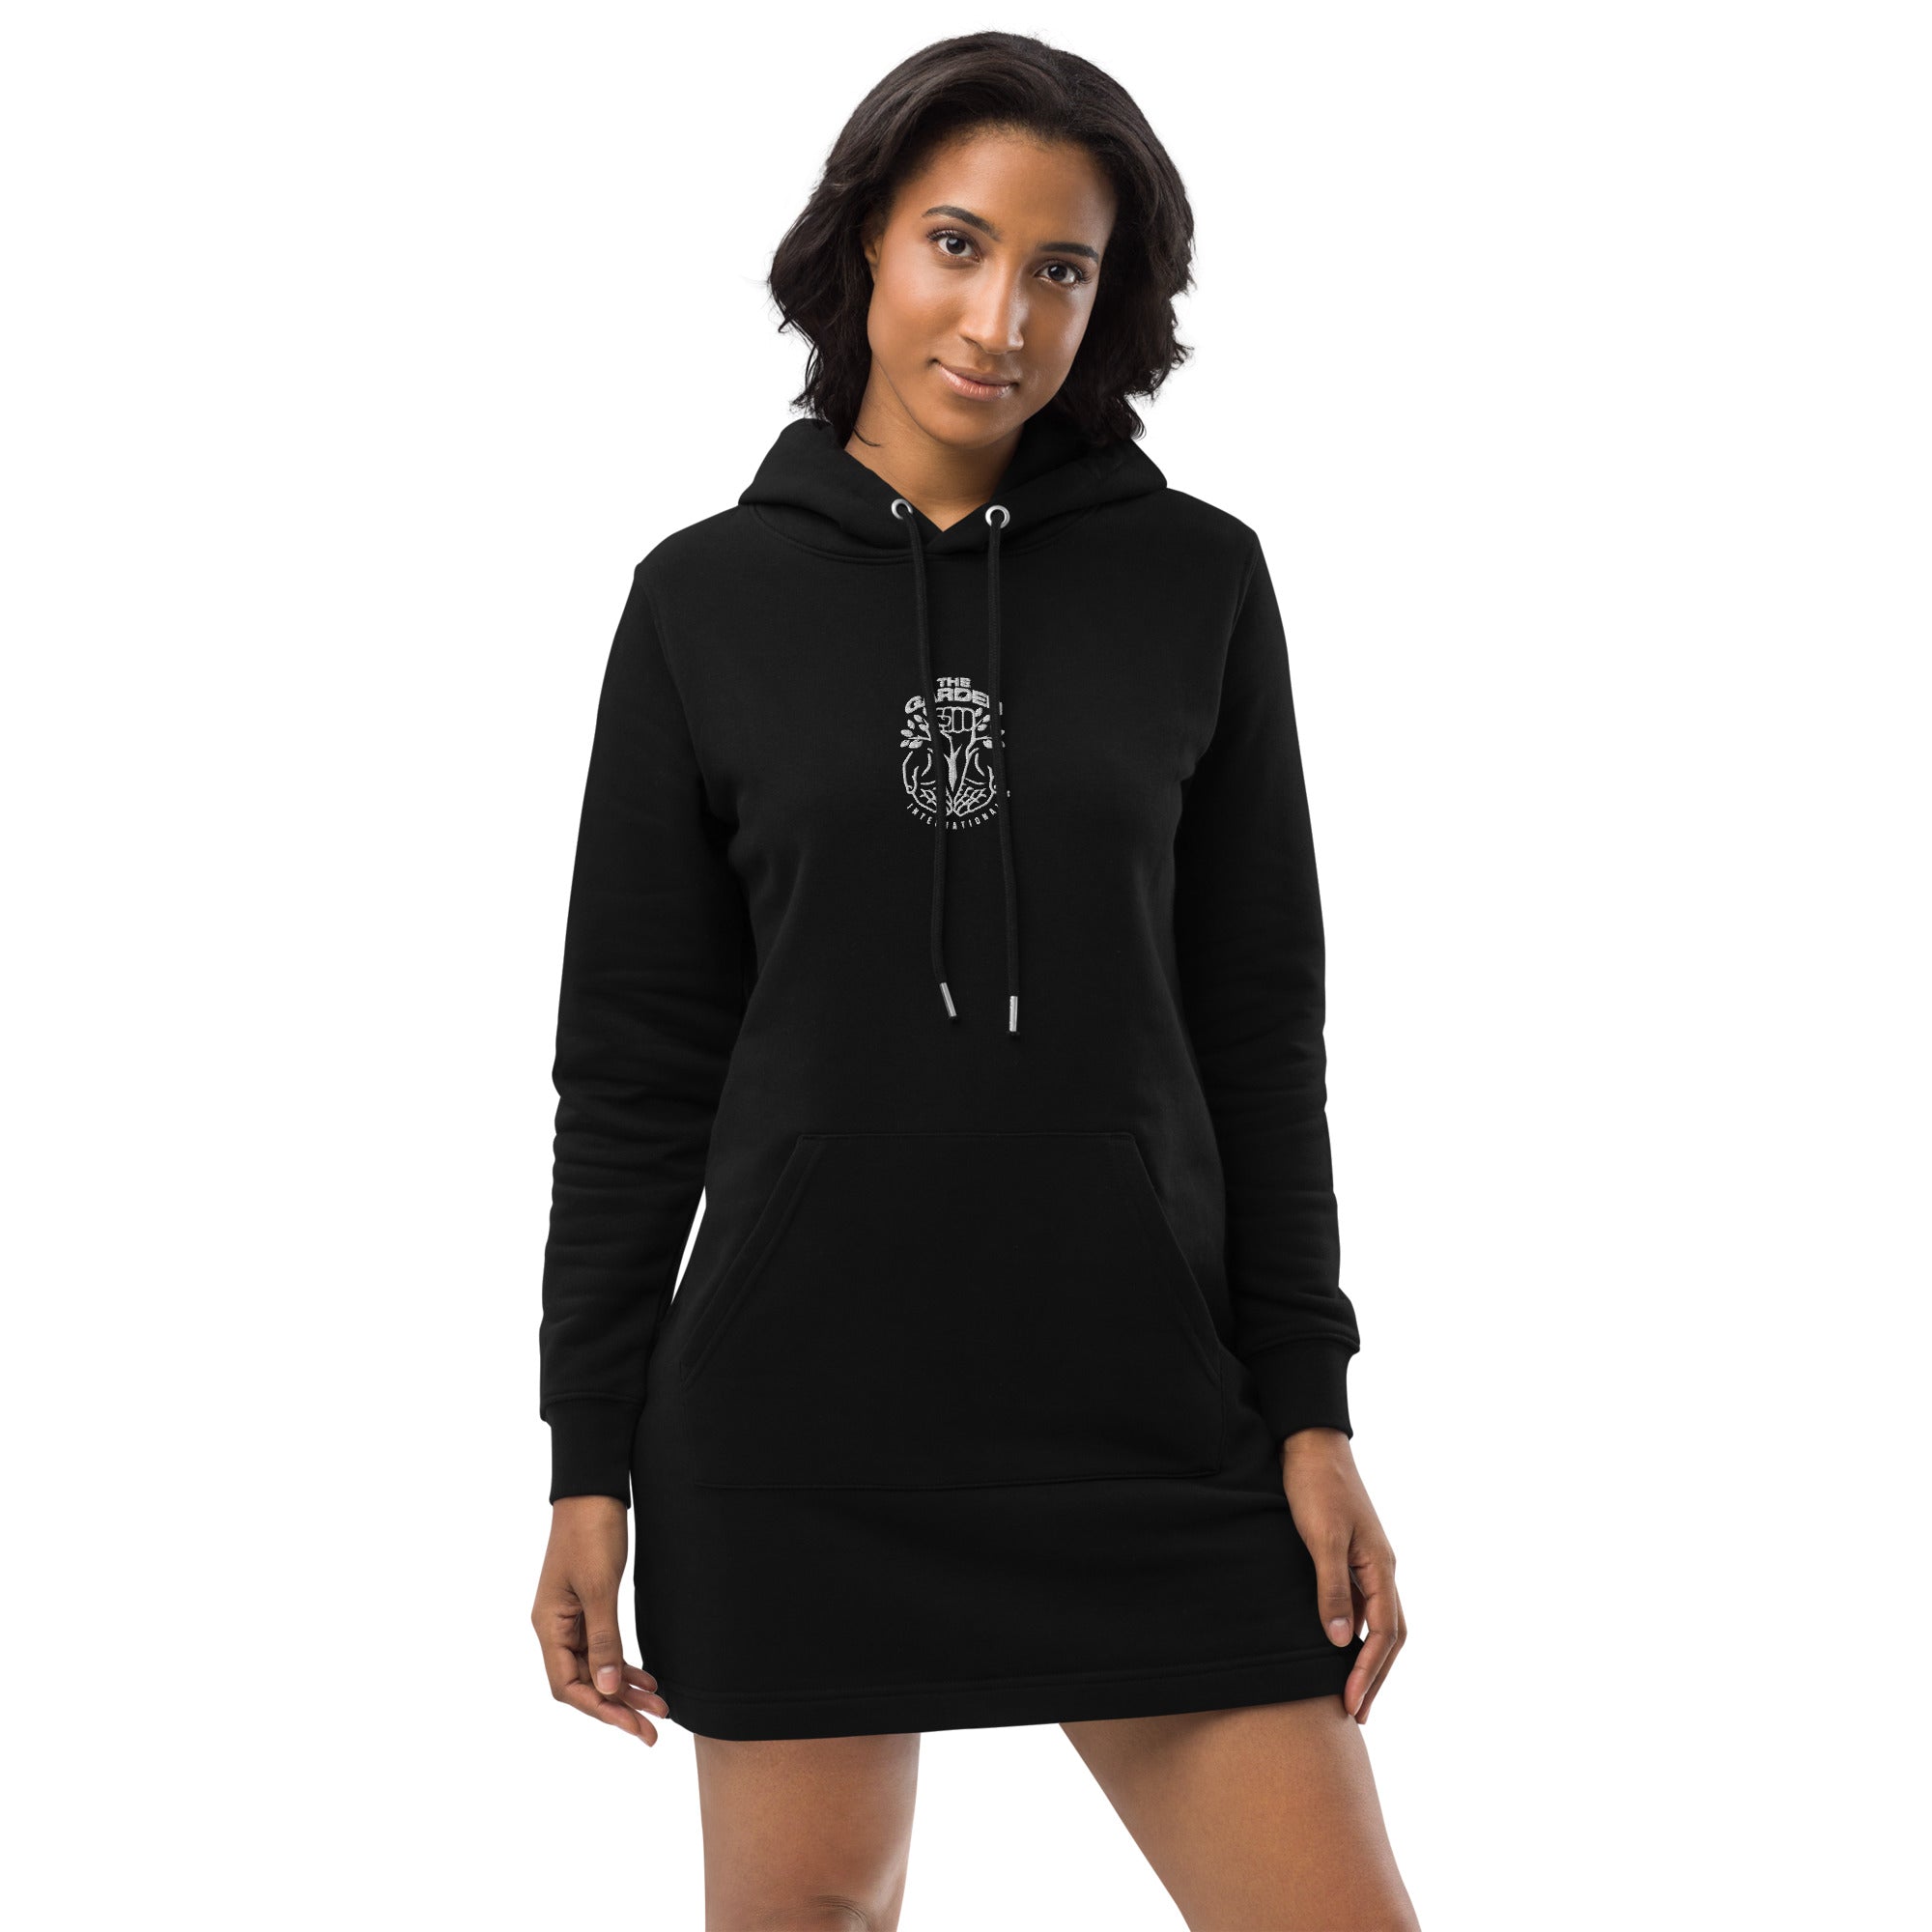 Embroidered Hoodie dress